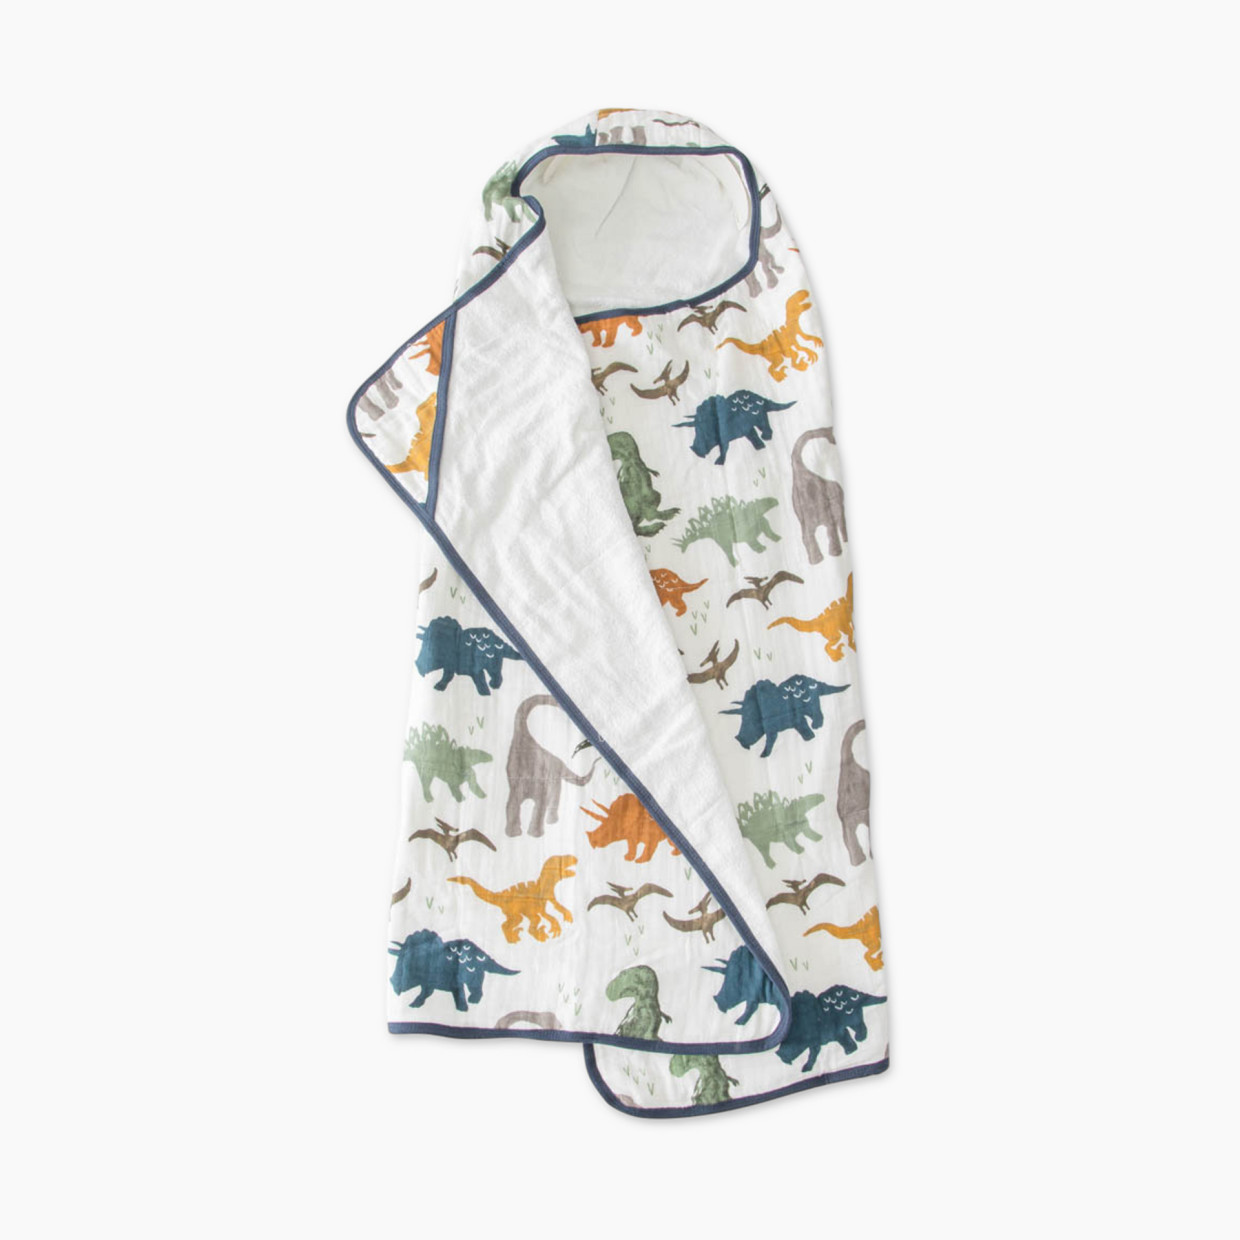 Little Unicorn Large Cotton Muslin & Terry Hooded Towel - Dino Friends, Large.